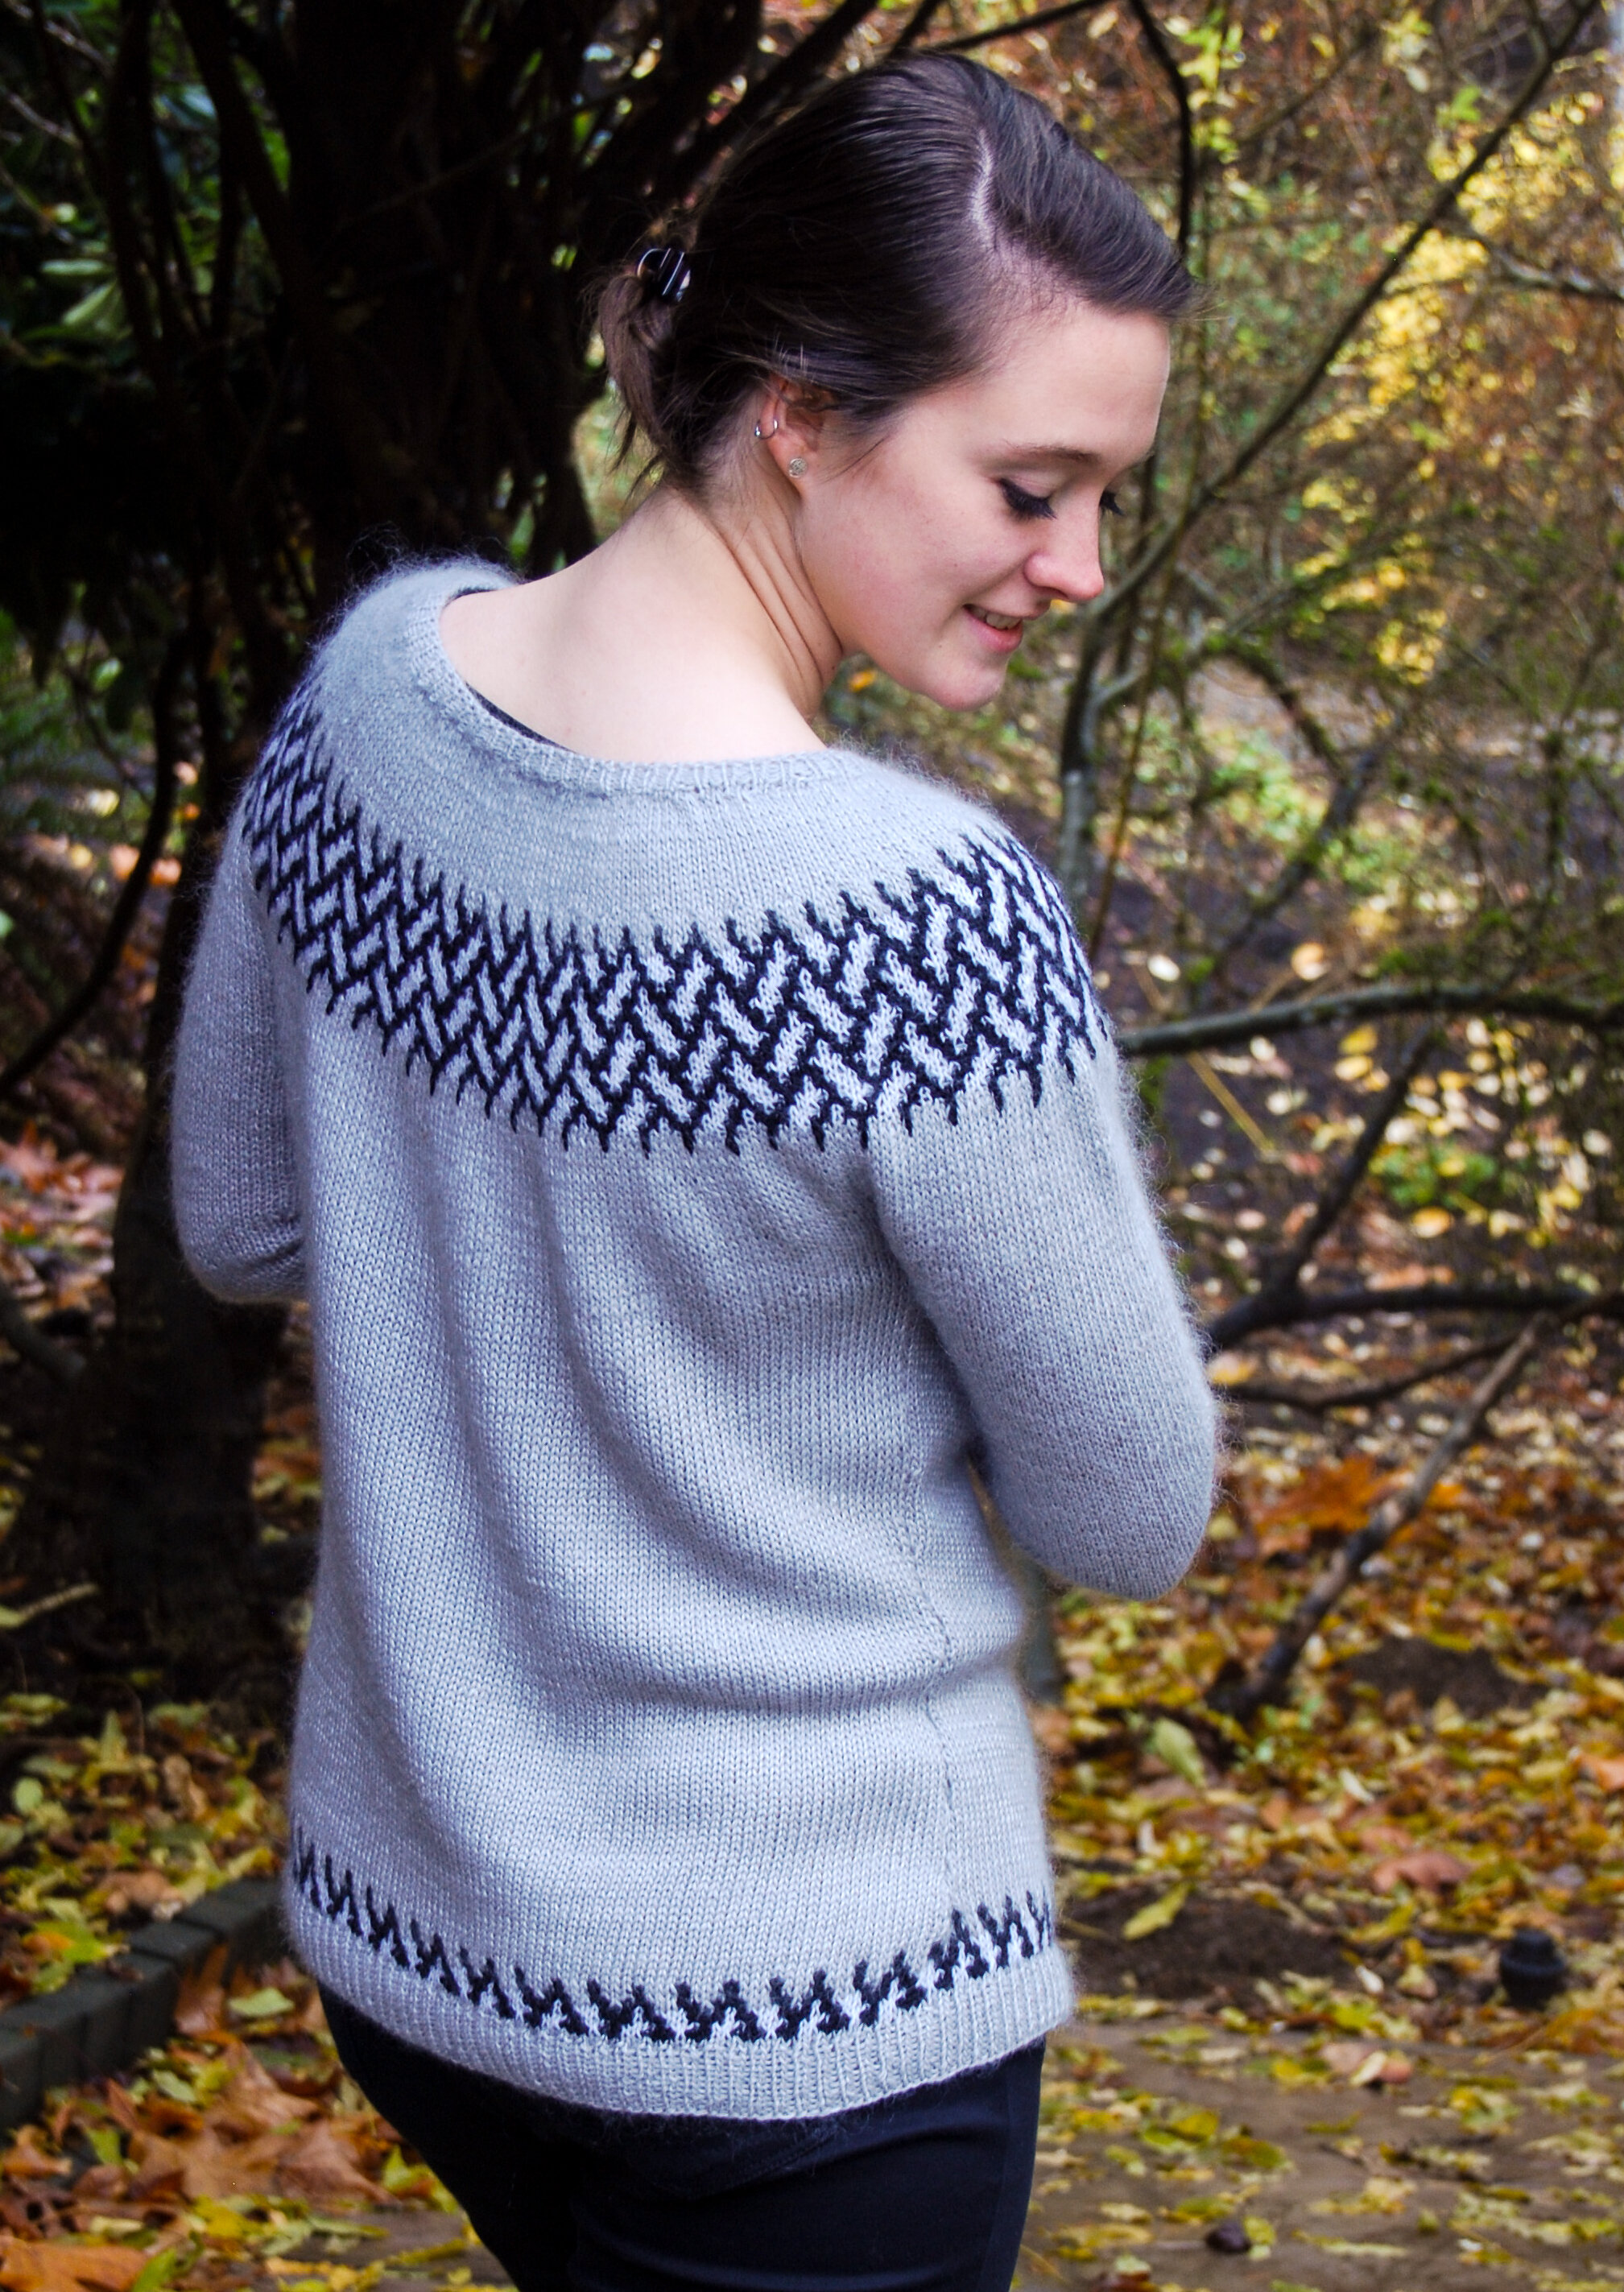 Basketcase Cardigan Knitting Pattern — Knit for the Soul by Kay Hopkins